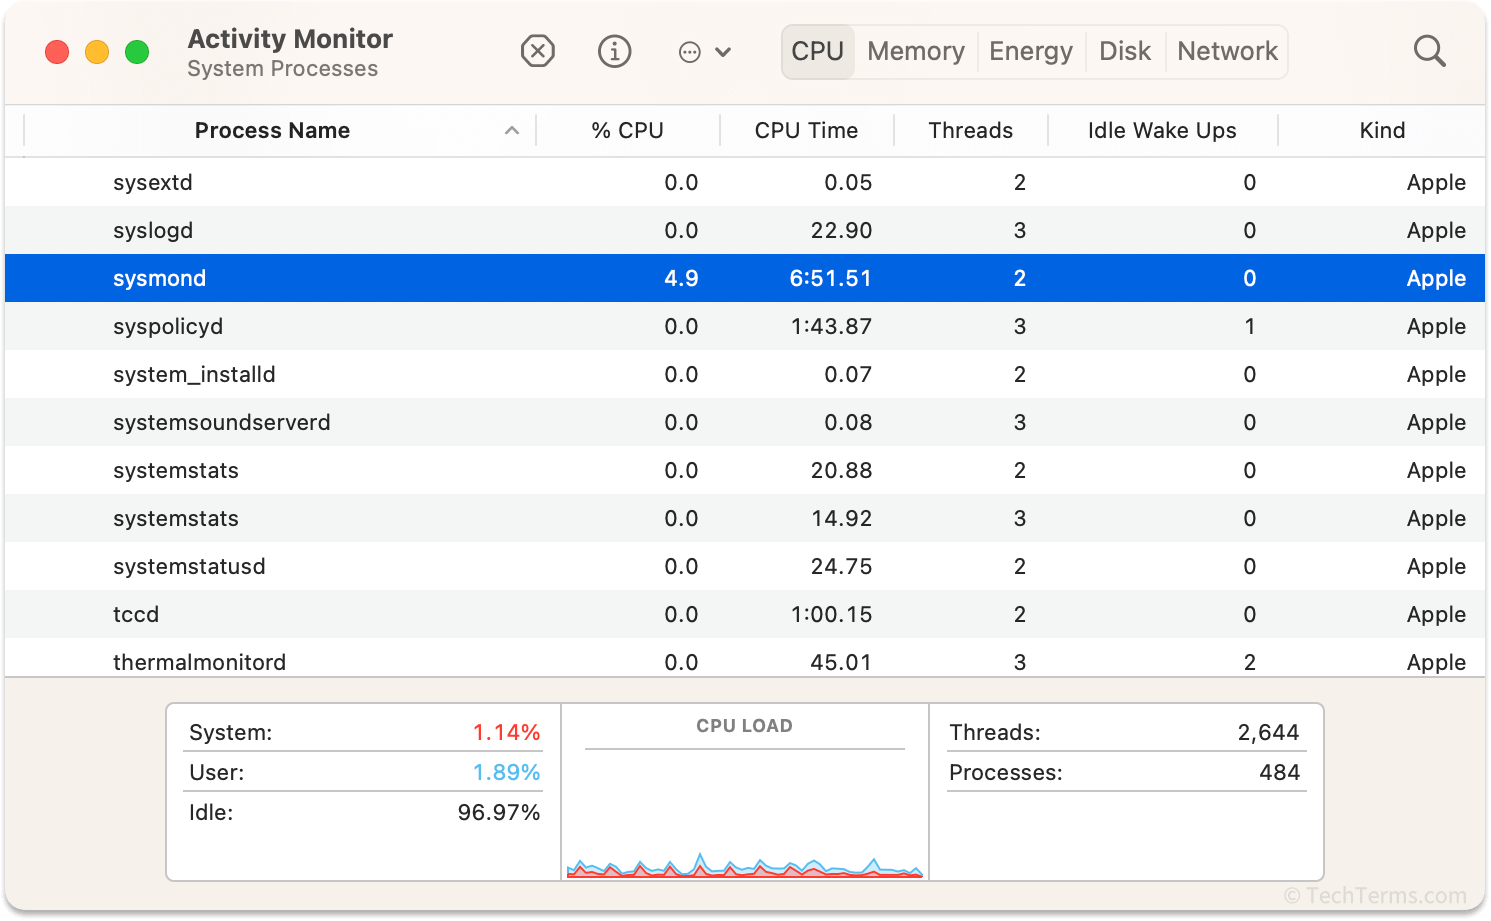 Activity Monitor in macOS with the <b>sysmond</b> daemon selected and several others visible